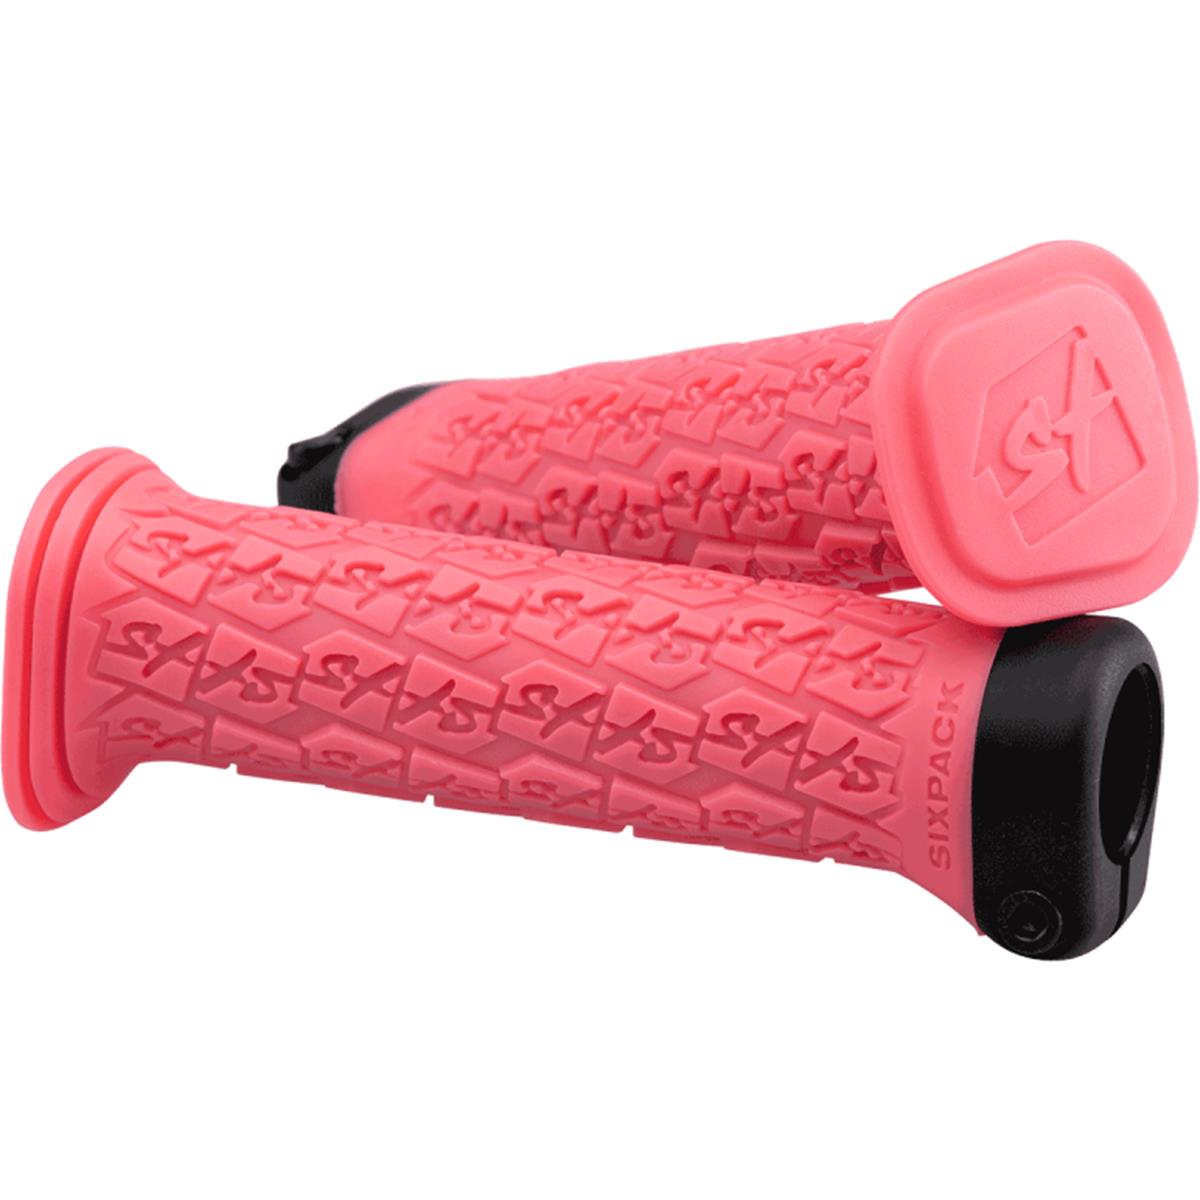 Sixpack Kids MTB Grips 1st Ride Lock-On System, 26 x 115 mm, Pink